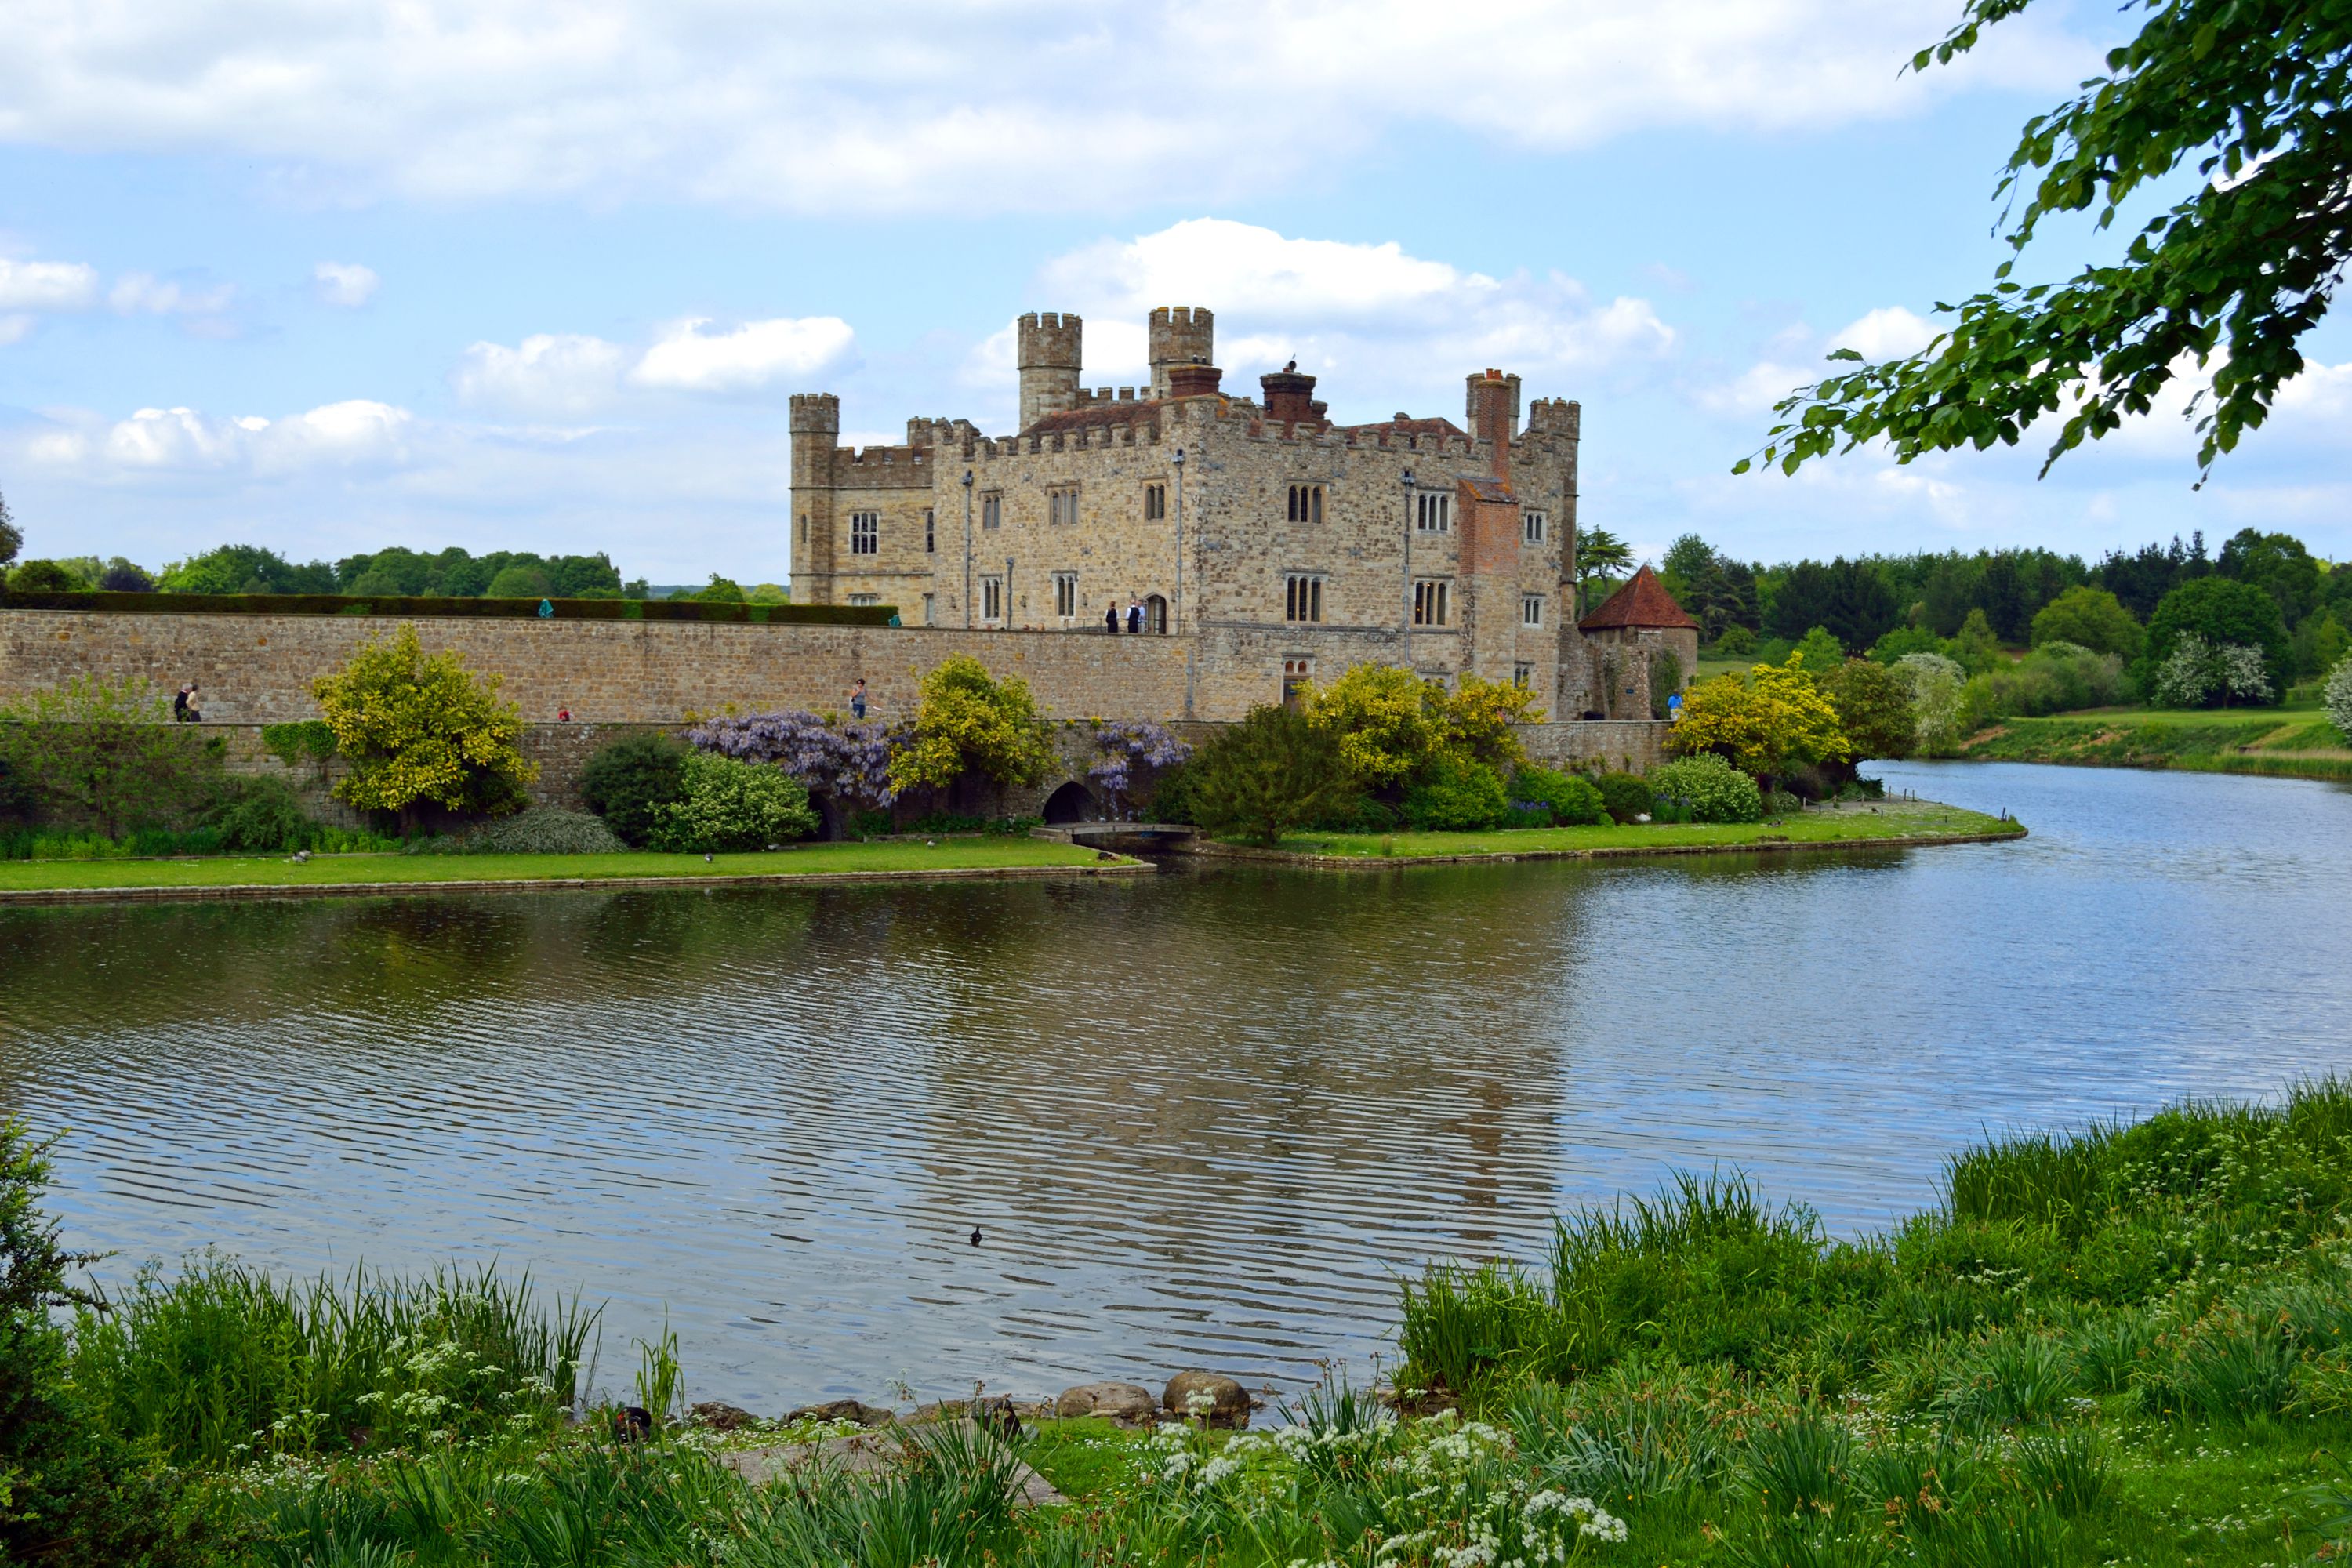 A Great Day Out at Leeds Castle